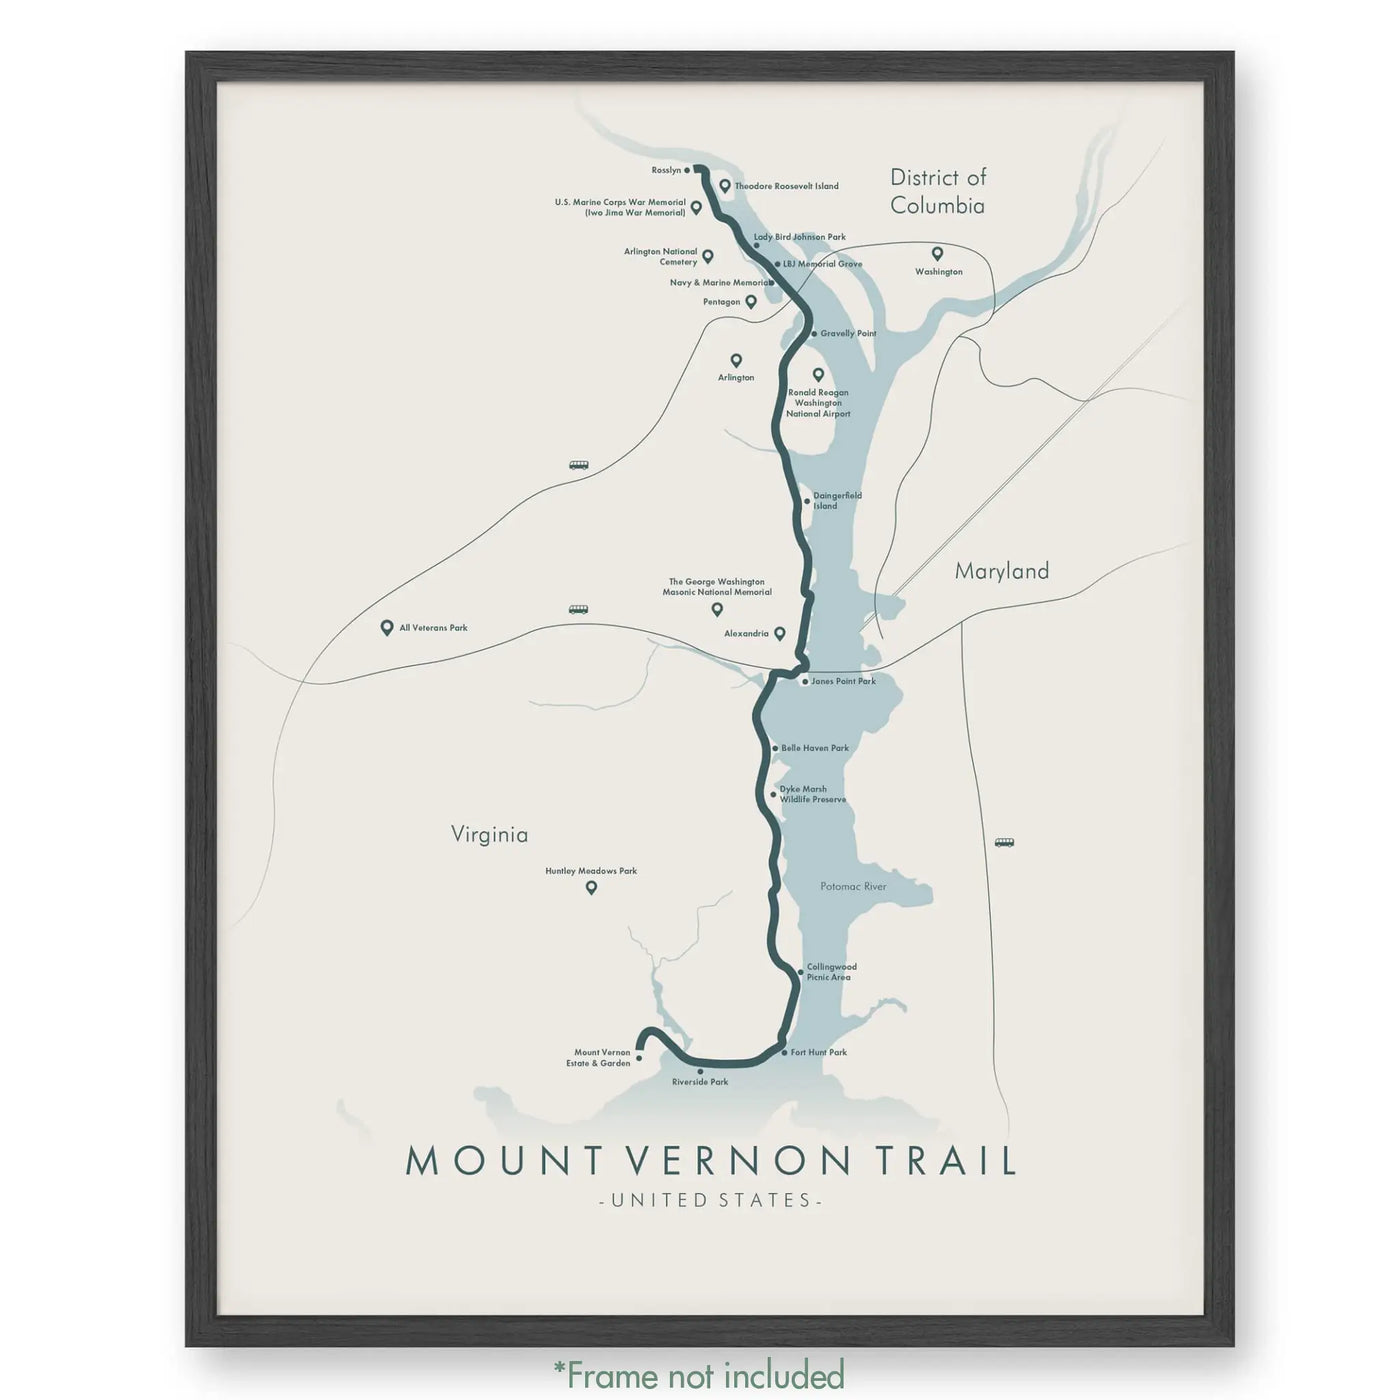 Trail Poster of Mount Vernon Trail - Beige